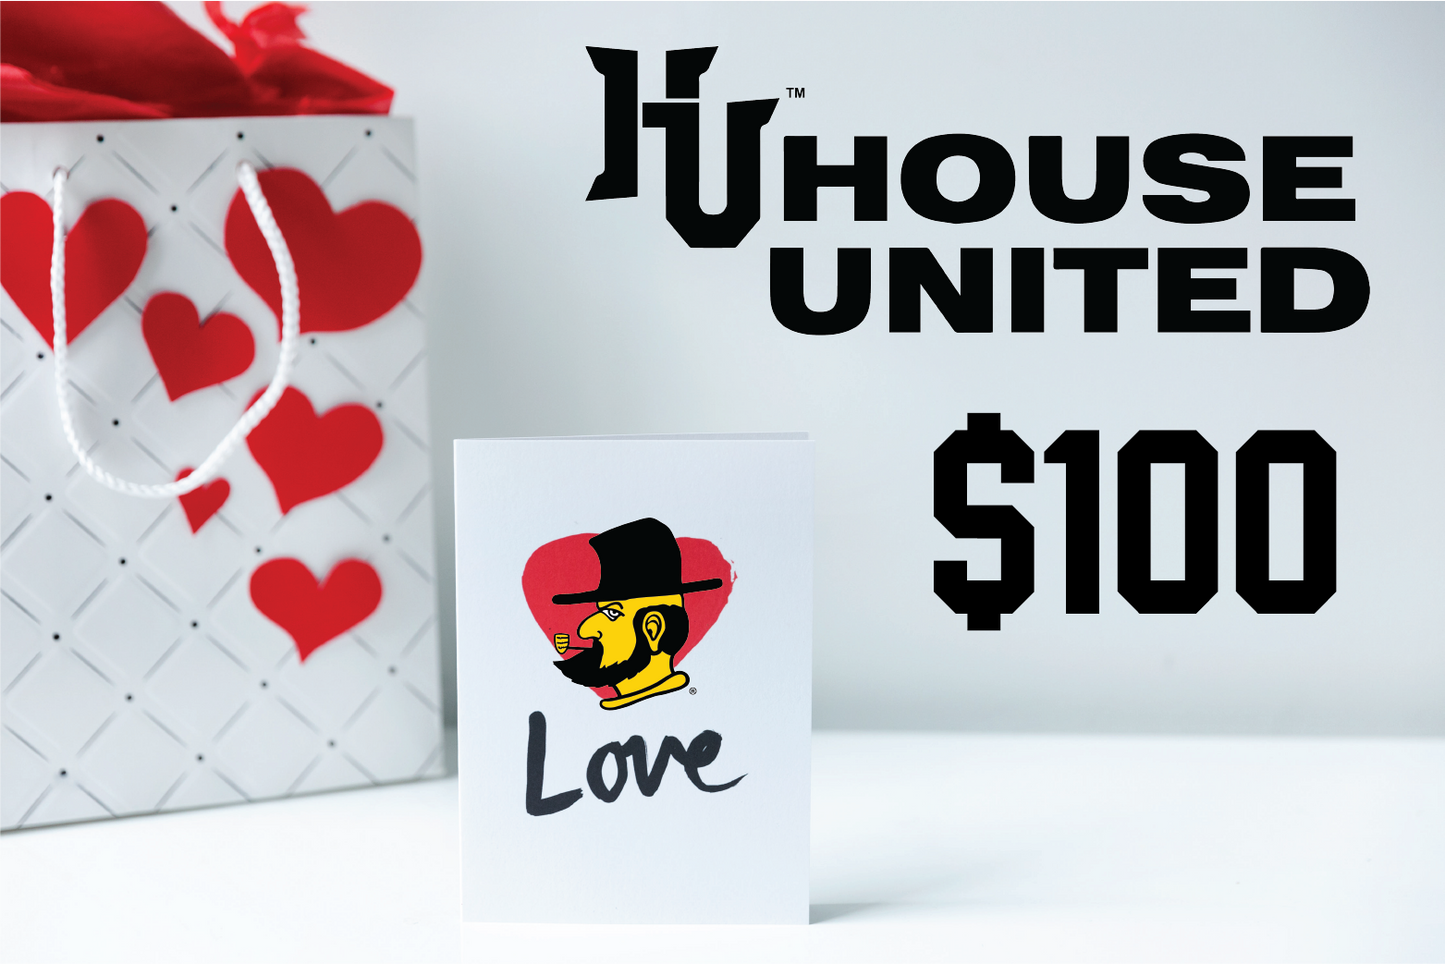 House United App State Gift Card